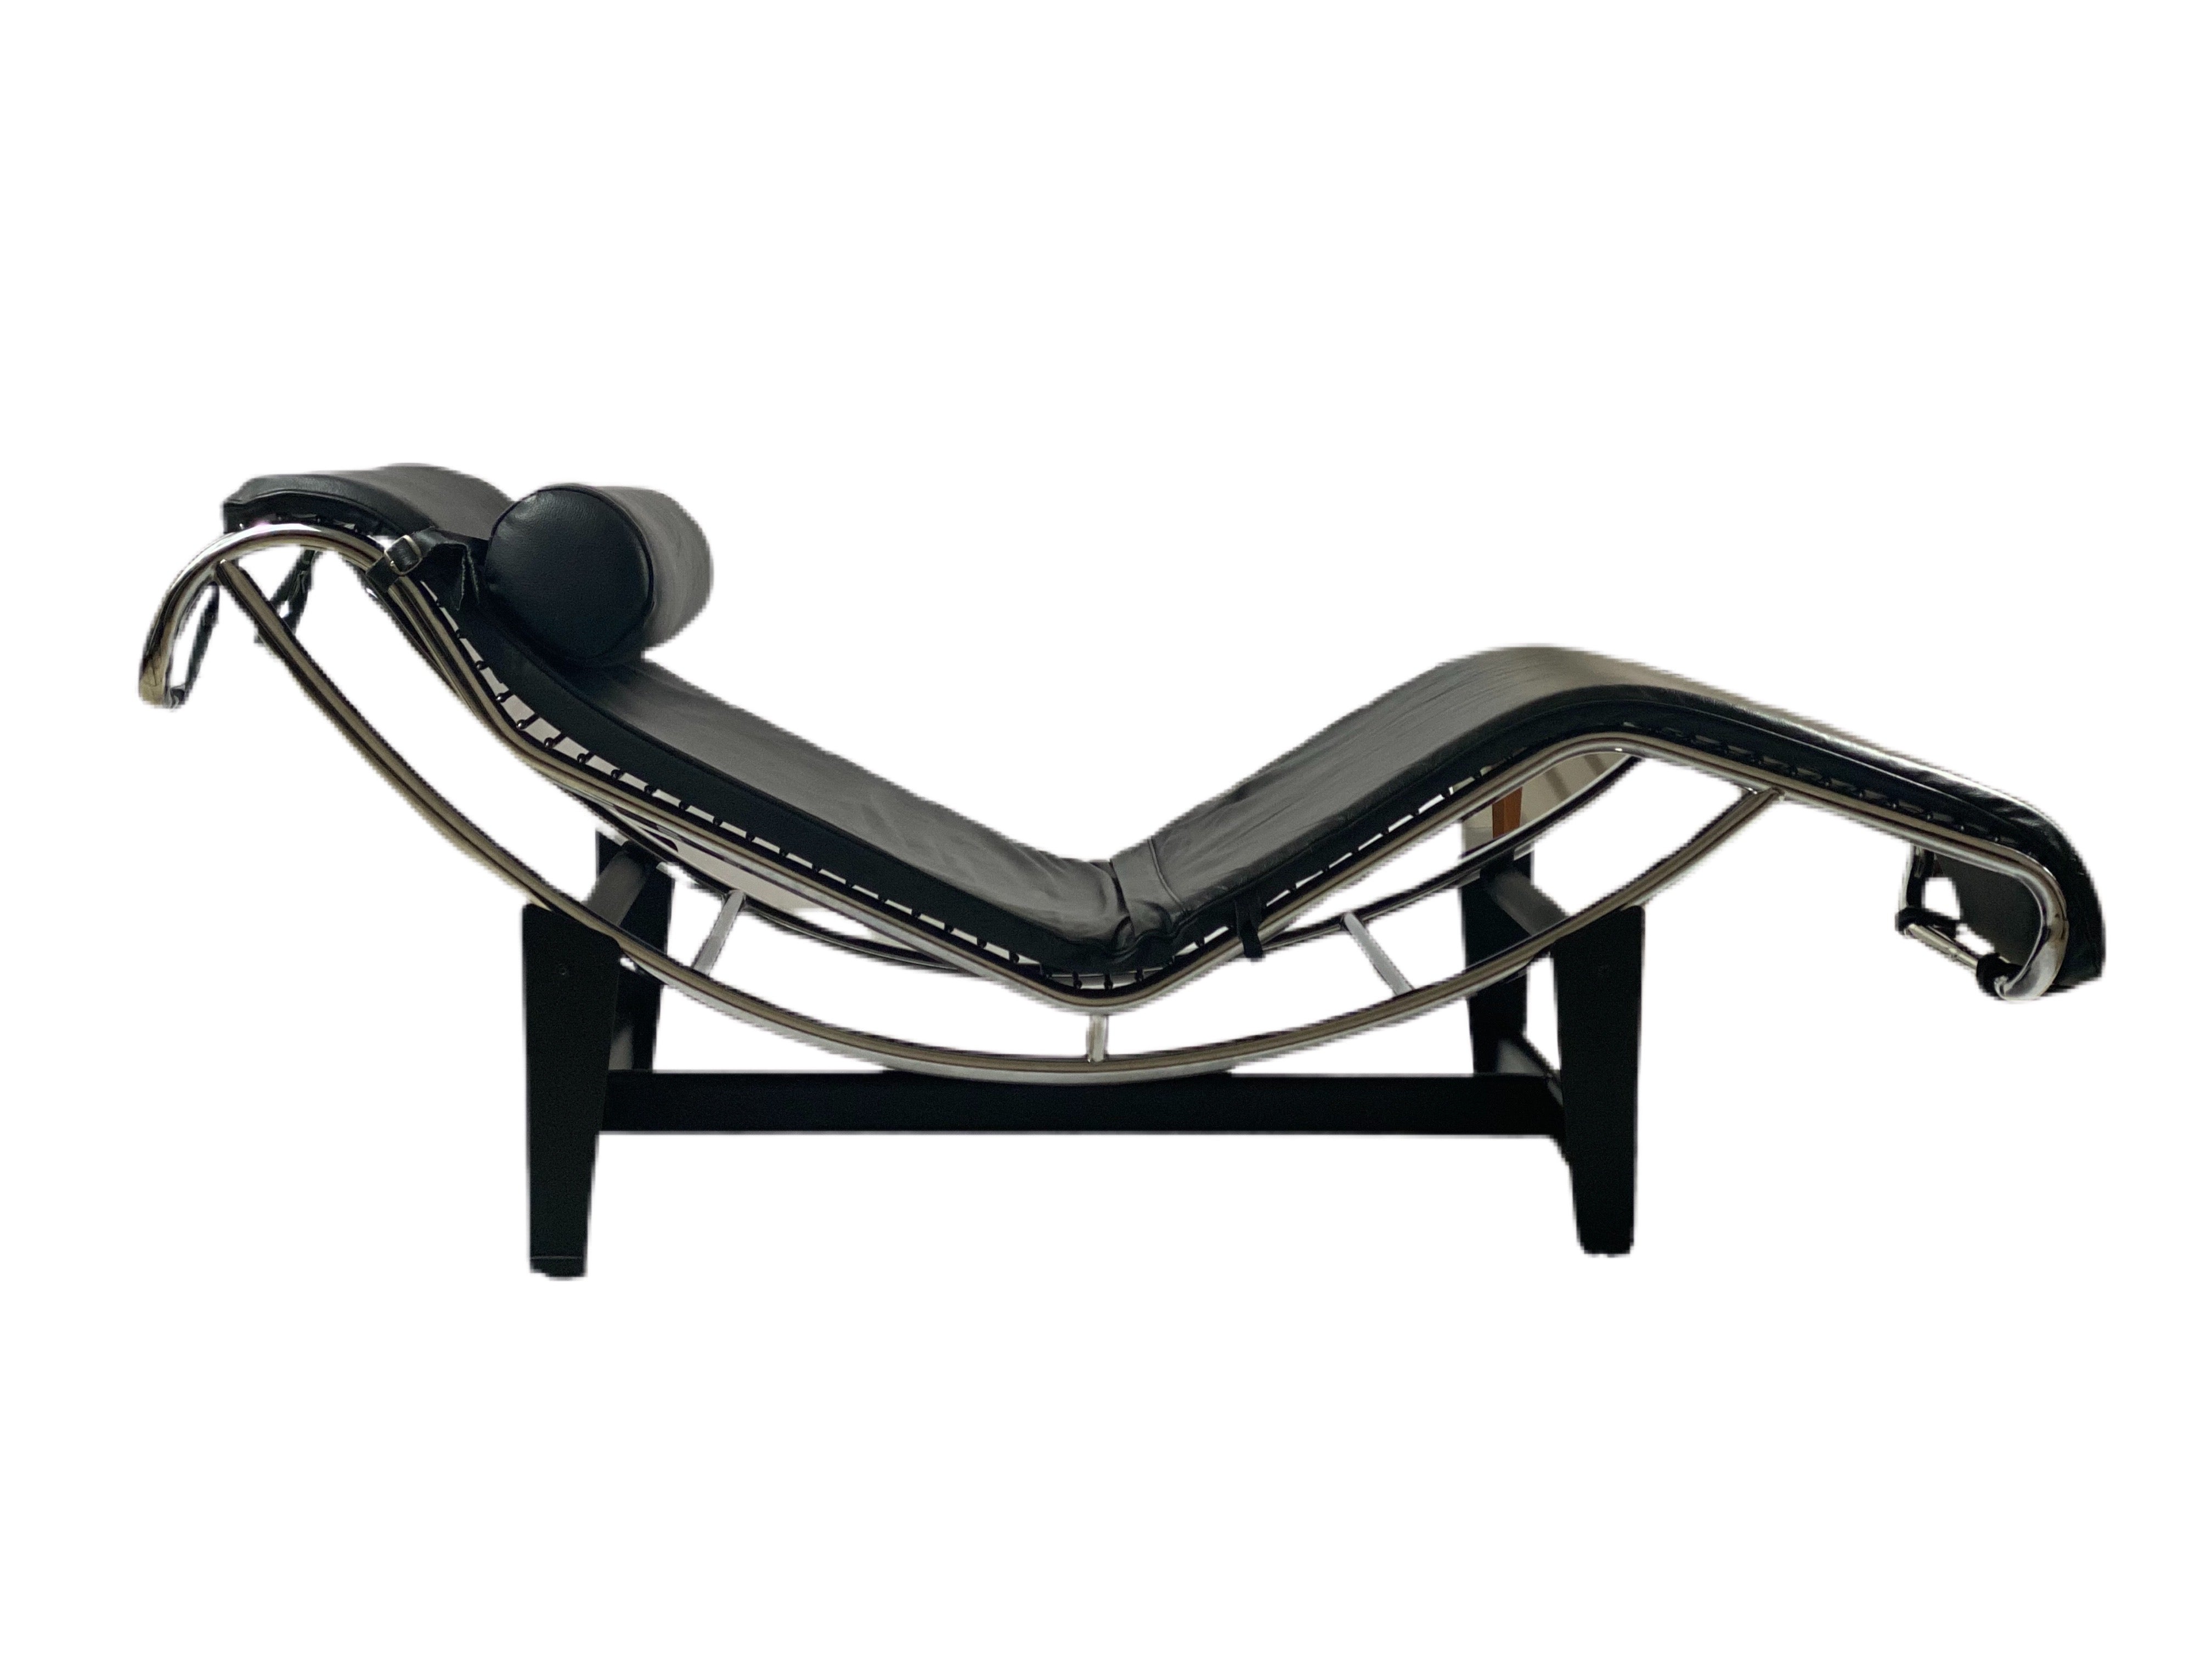 MLF Le Corbusier Style LC4 Chaise Lounge Chair(Multi Colors